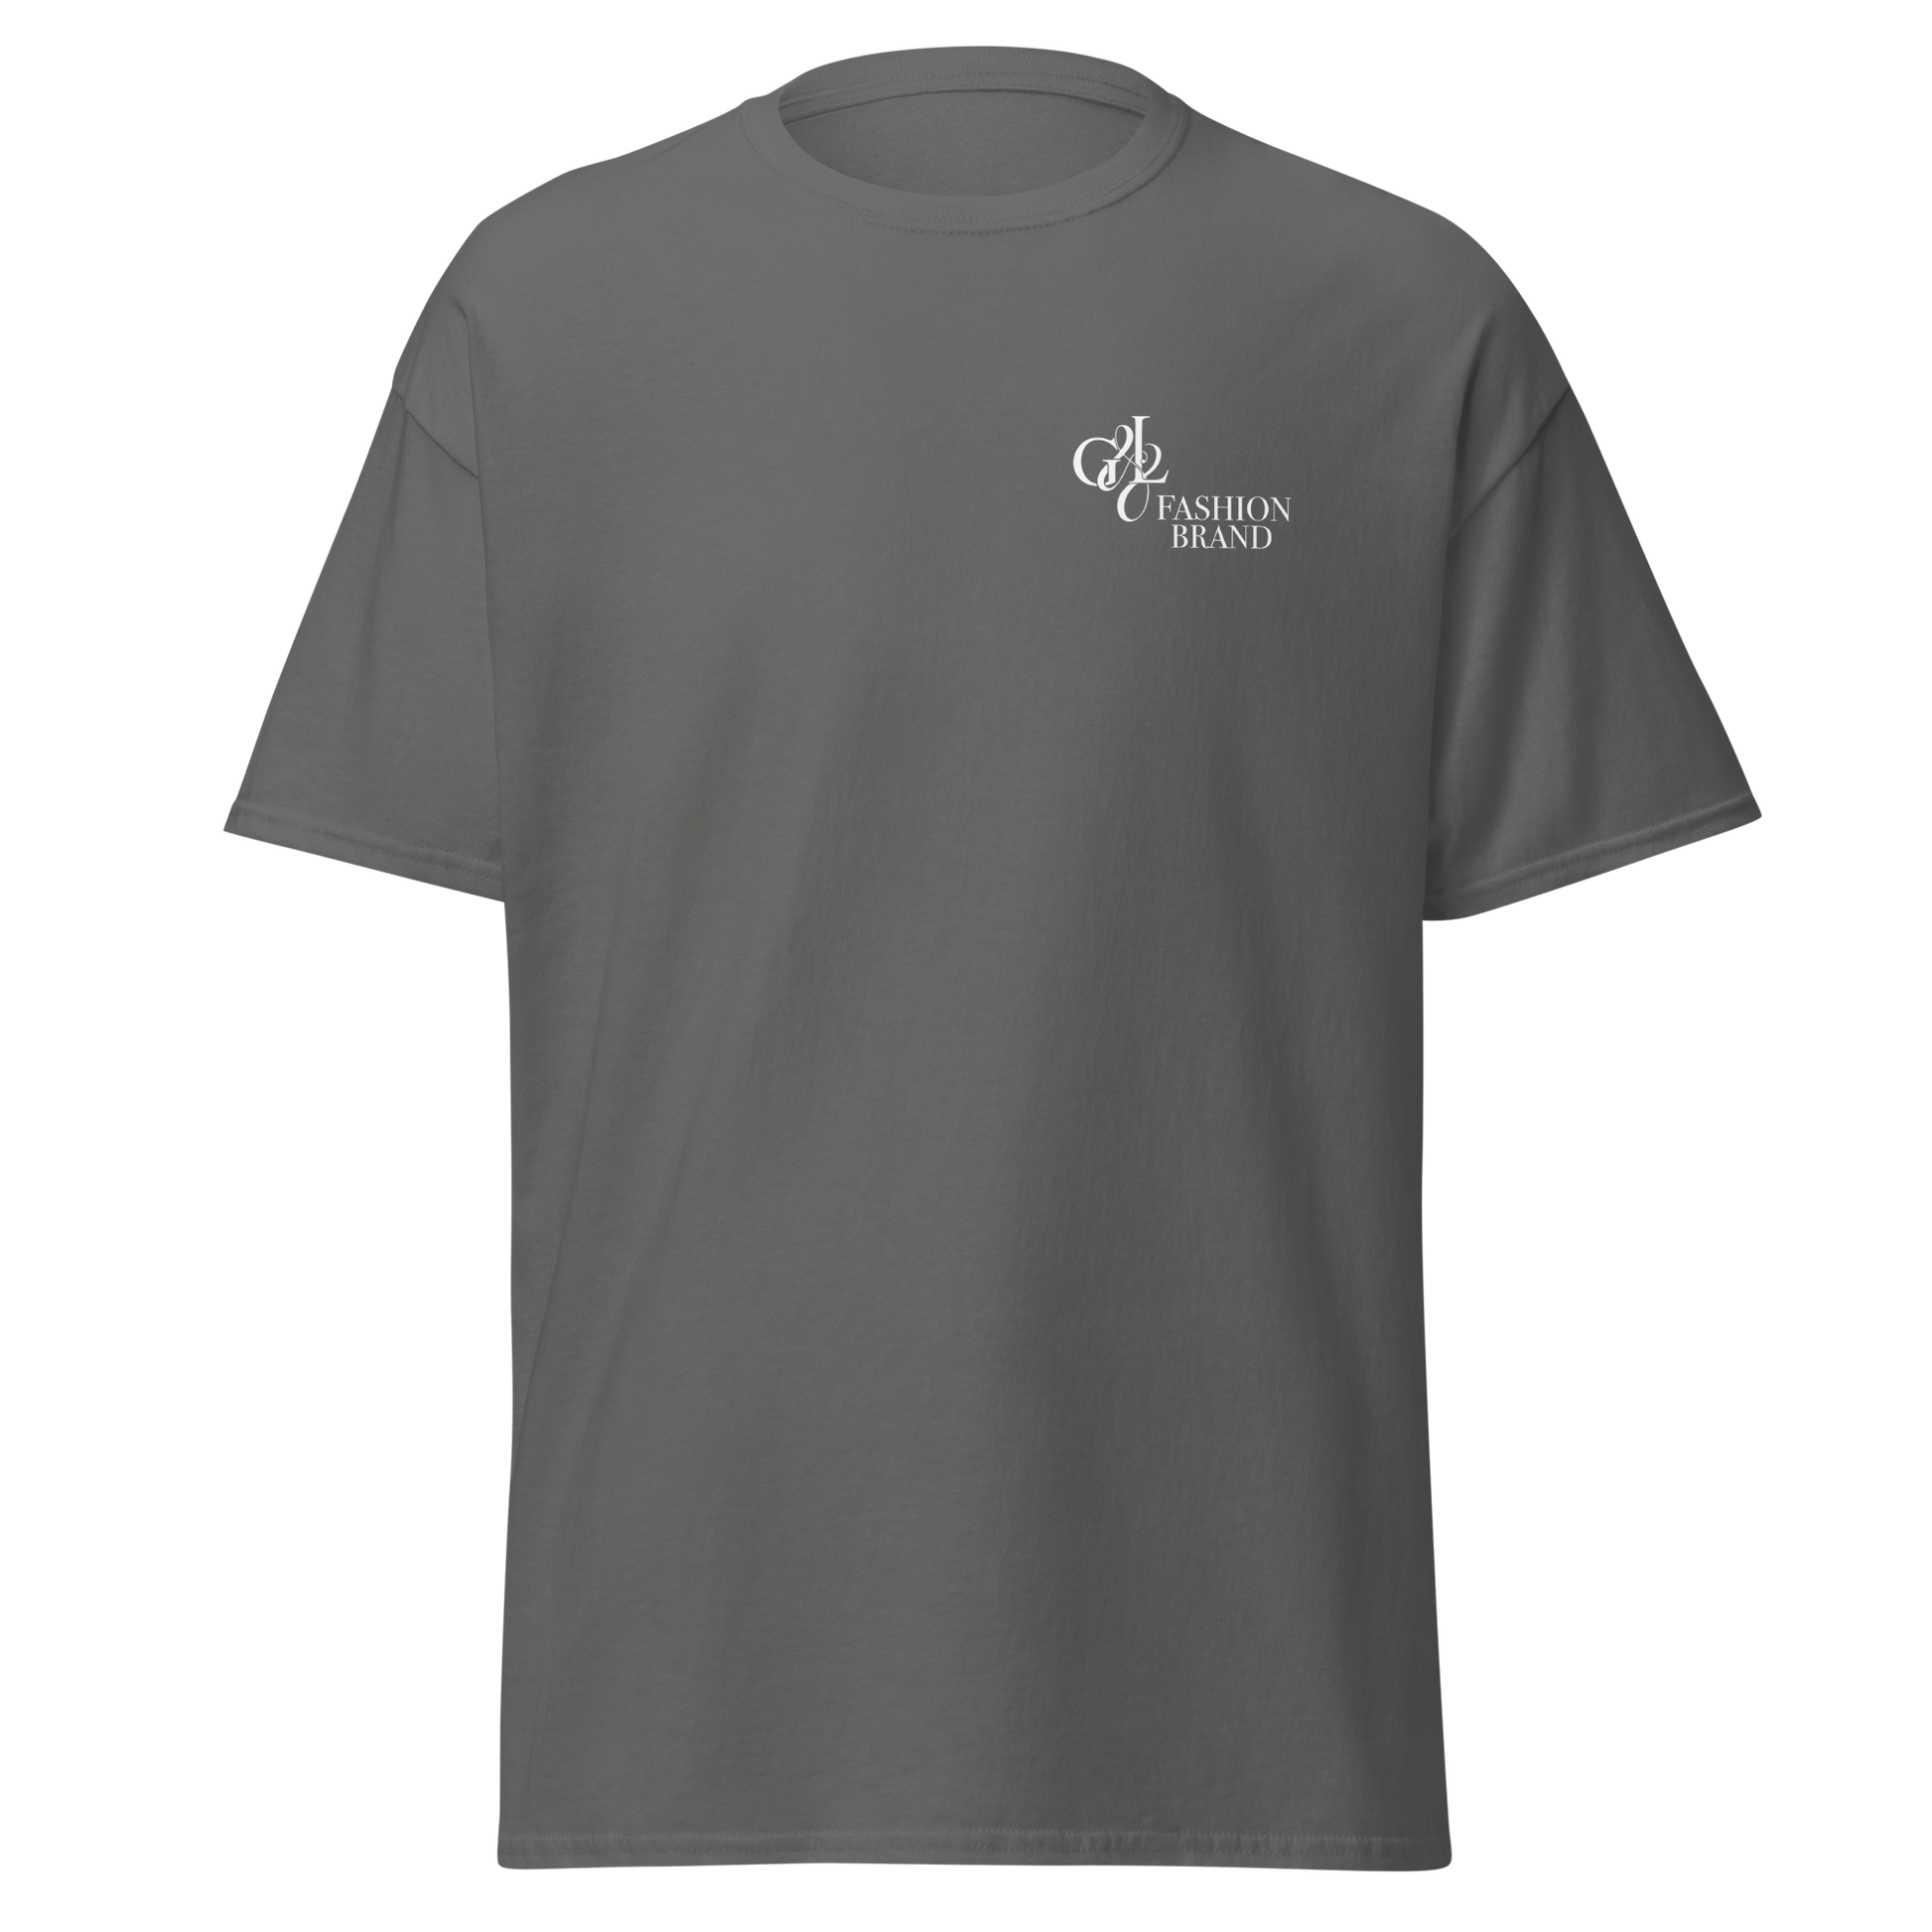 Experience premium quality with G&L Fashion Brand’s charcoal DTG T-shirt. Featuring vibrant direct-to-garment printing, this stylish and comfortable piece is perfect for any casual occasion. Elevate your wardrobe with G&L Fashion Brand.